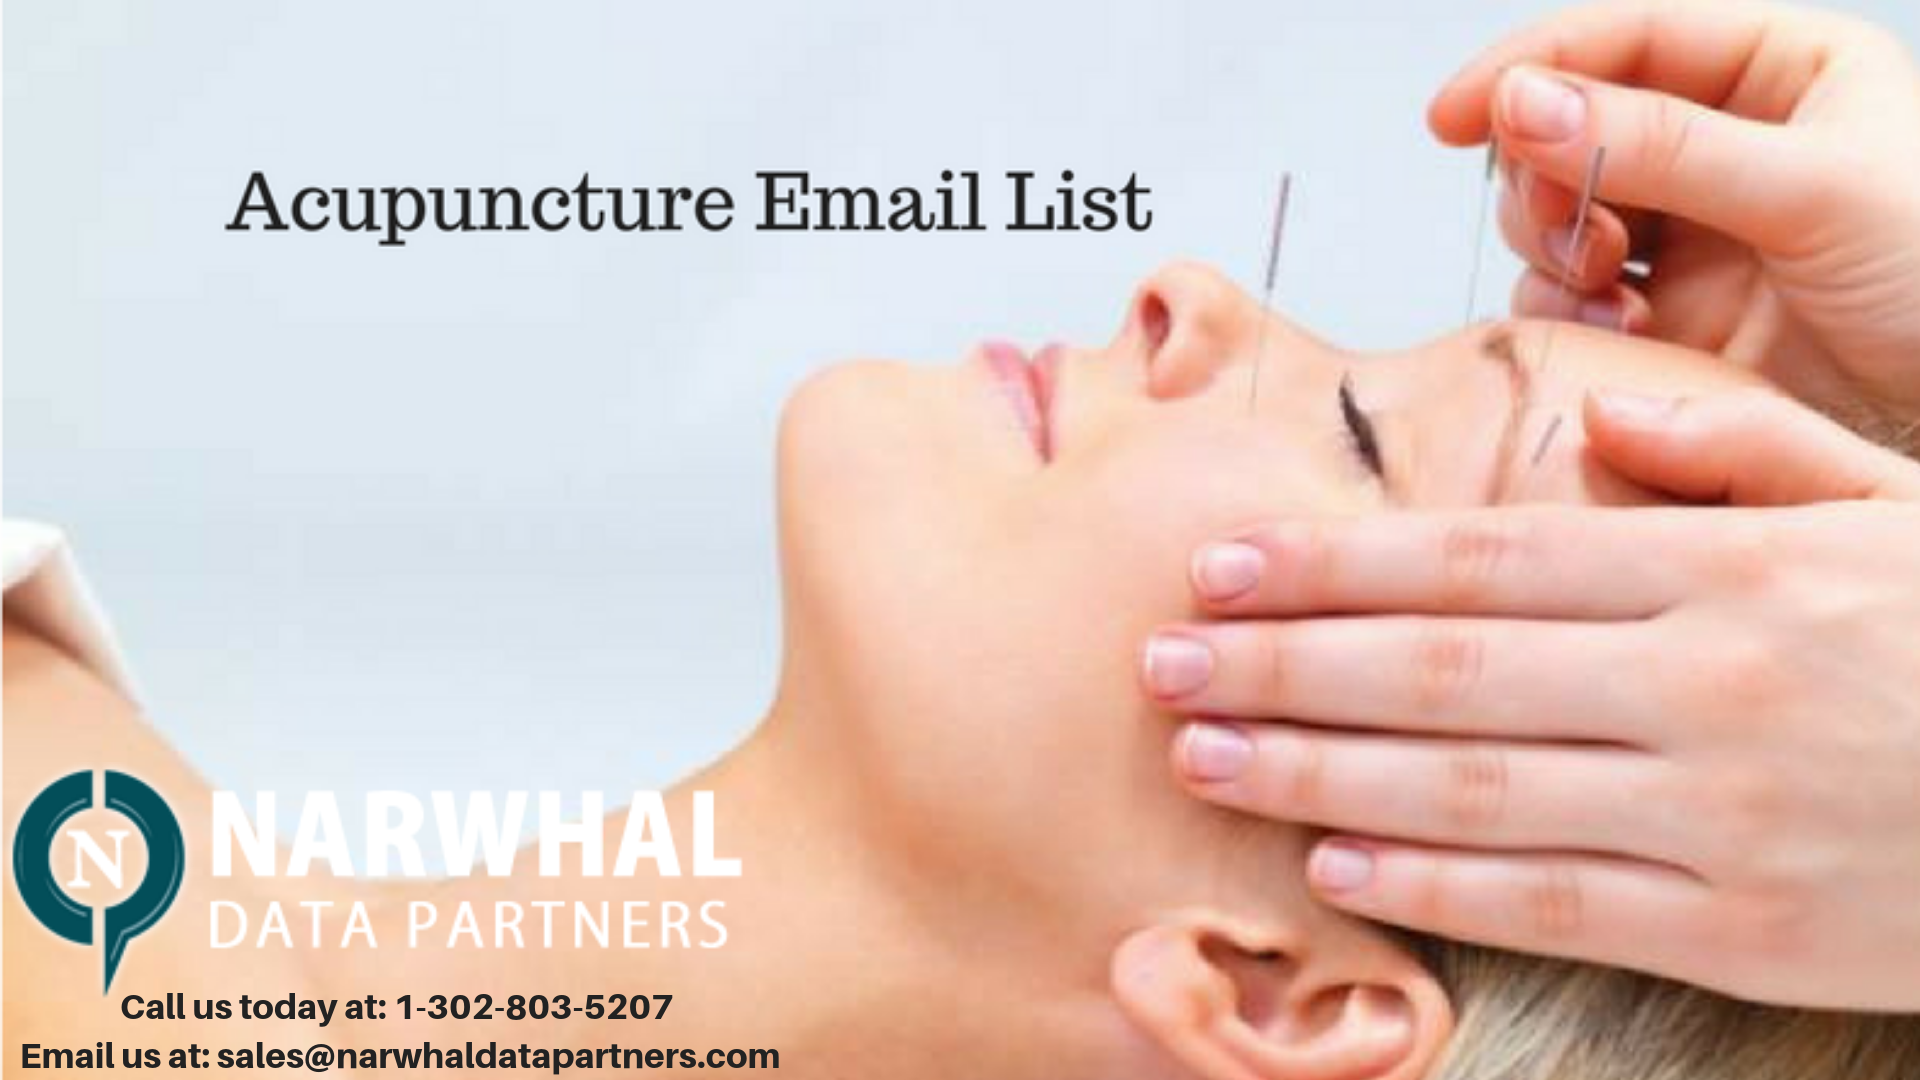 http://narwhaldatapartners.com/acupuncture-email-list.html